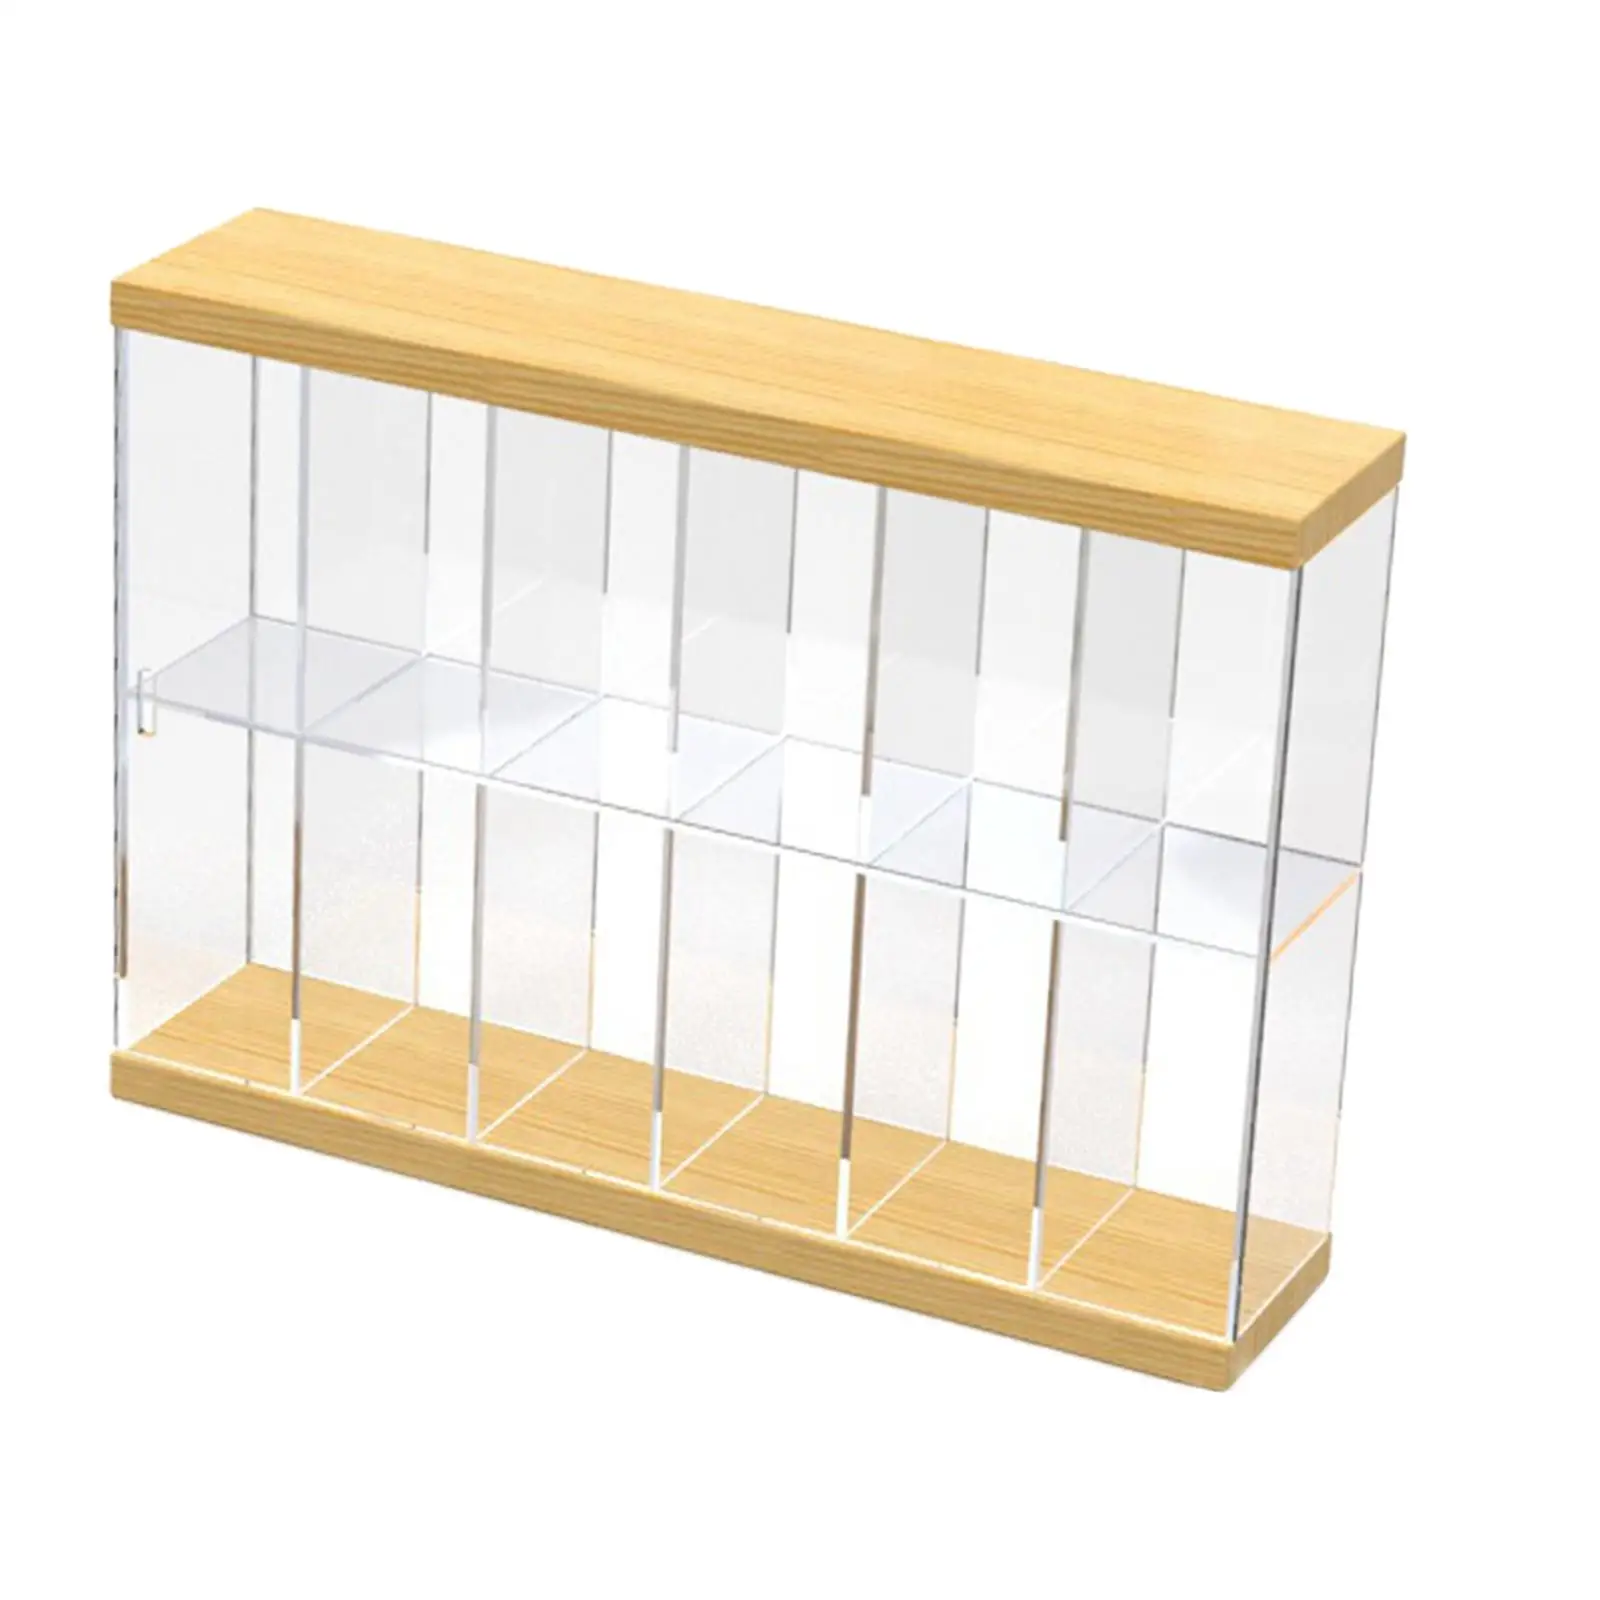 Acrylic Display Shelves Display Stands Cabinet Organizer Transparent Holder for Dolls Action Figure Mini Toys Collections Makeup